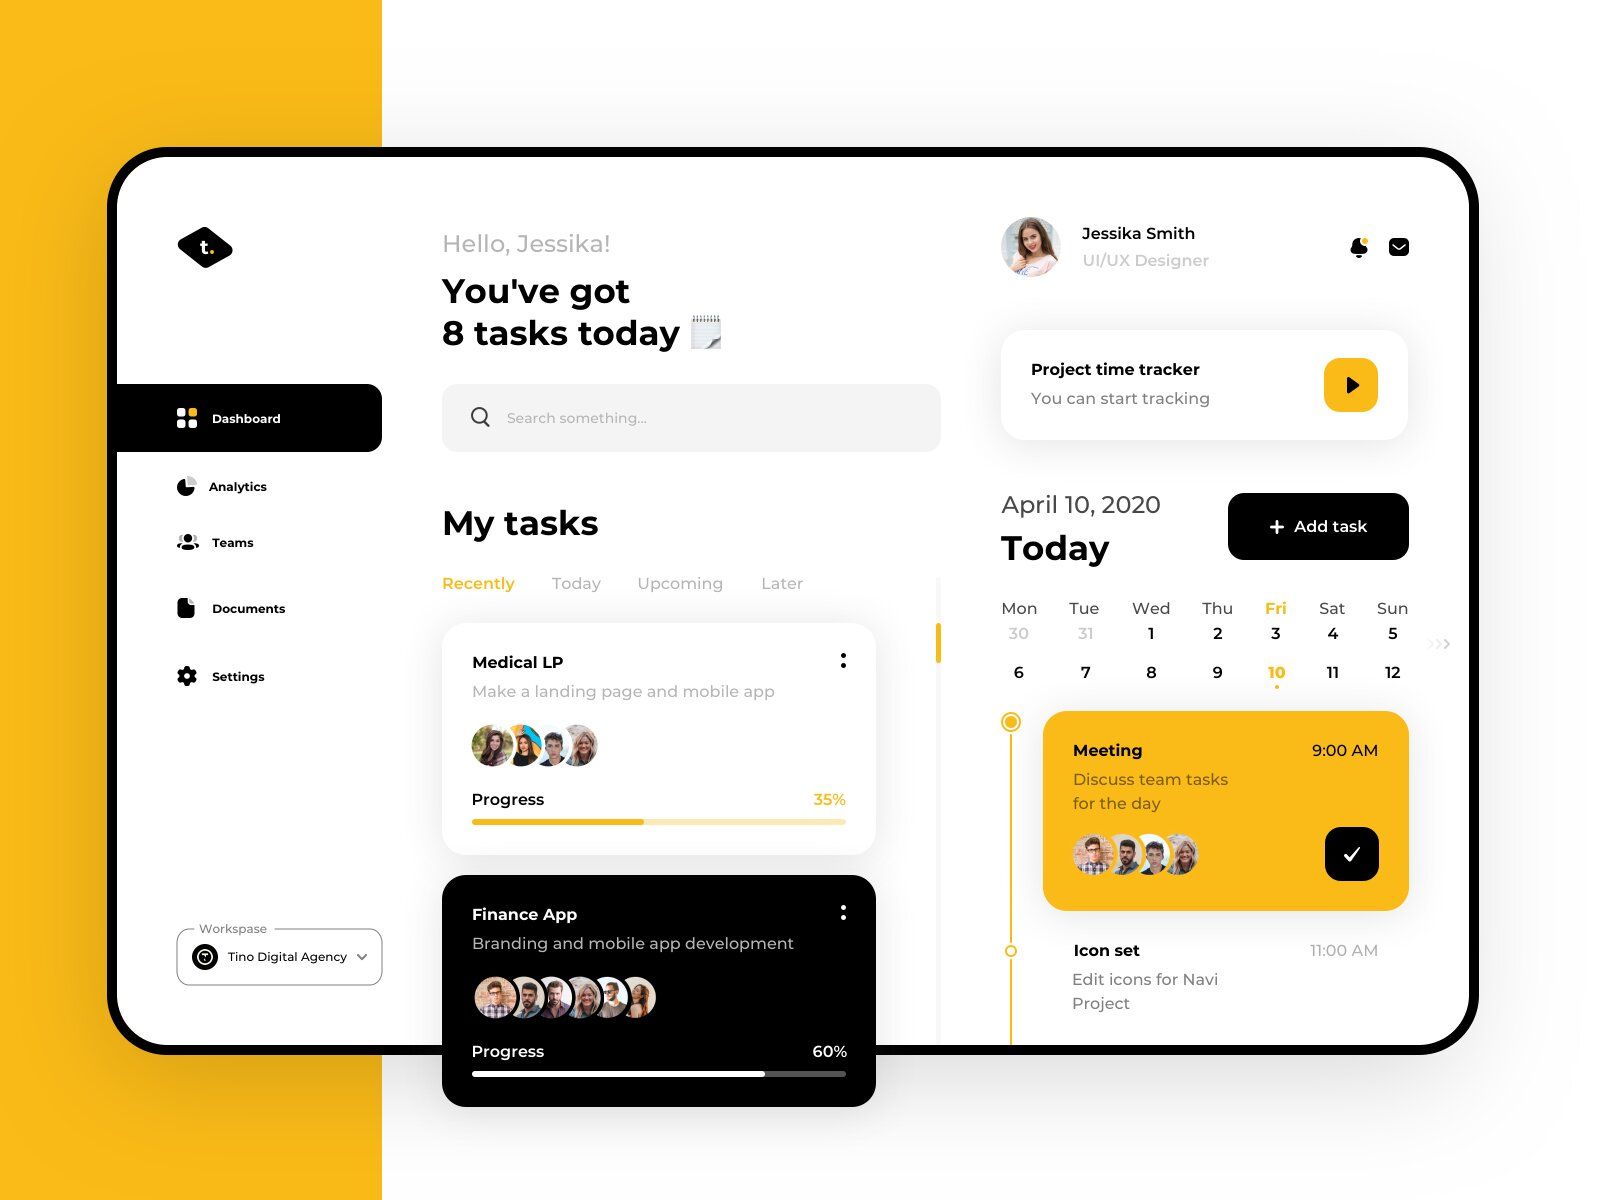 Read on if you want to develop team task management software to improve team collaboration within projects and tasks (*image by [Anastasia](https://dribbble.com/anastasia-tino){ rel="nofollow" target="_blank" .default-md}*)